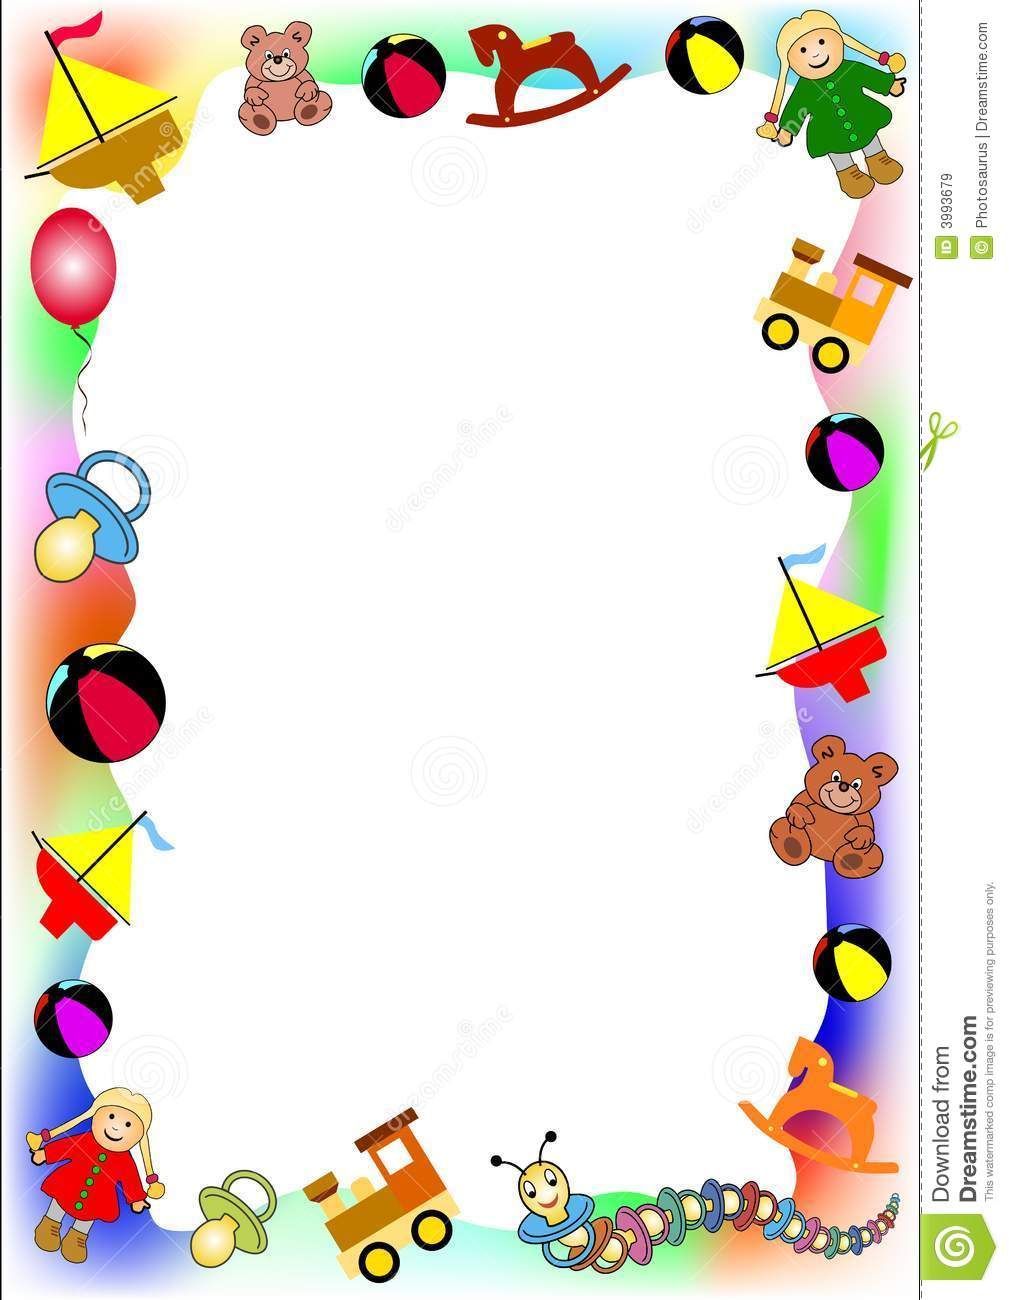 clipart frame toy